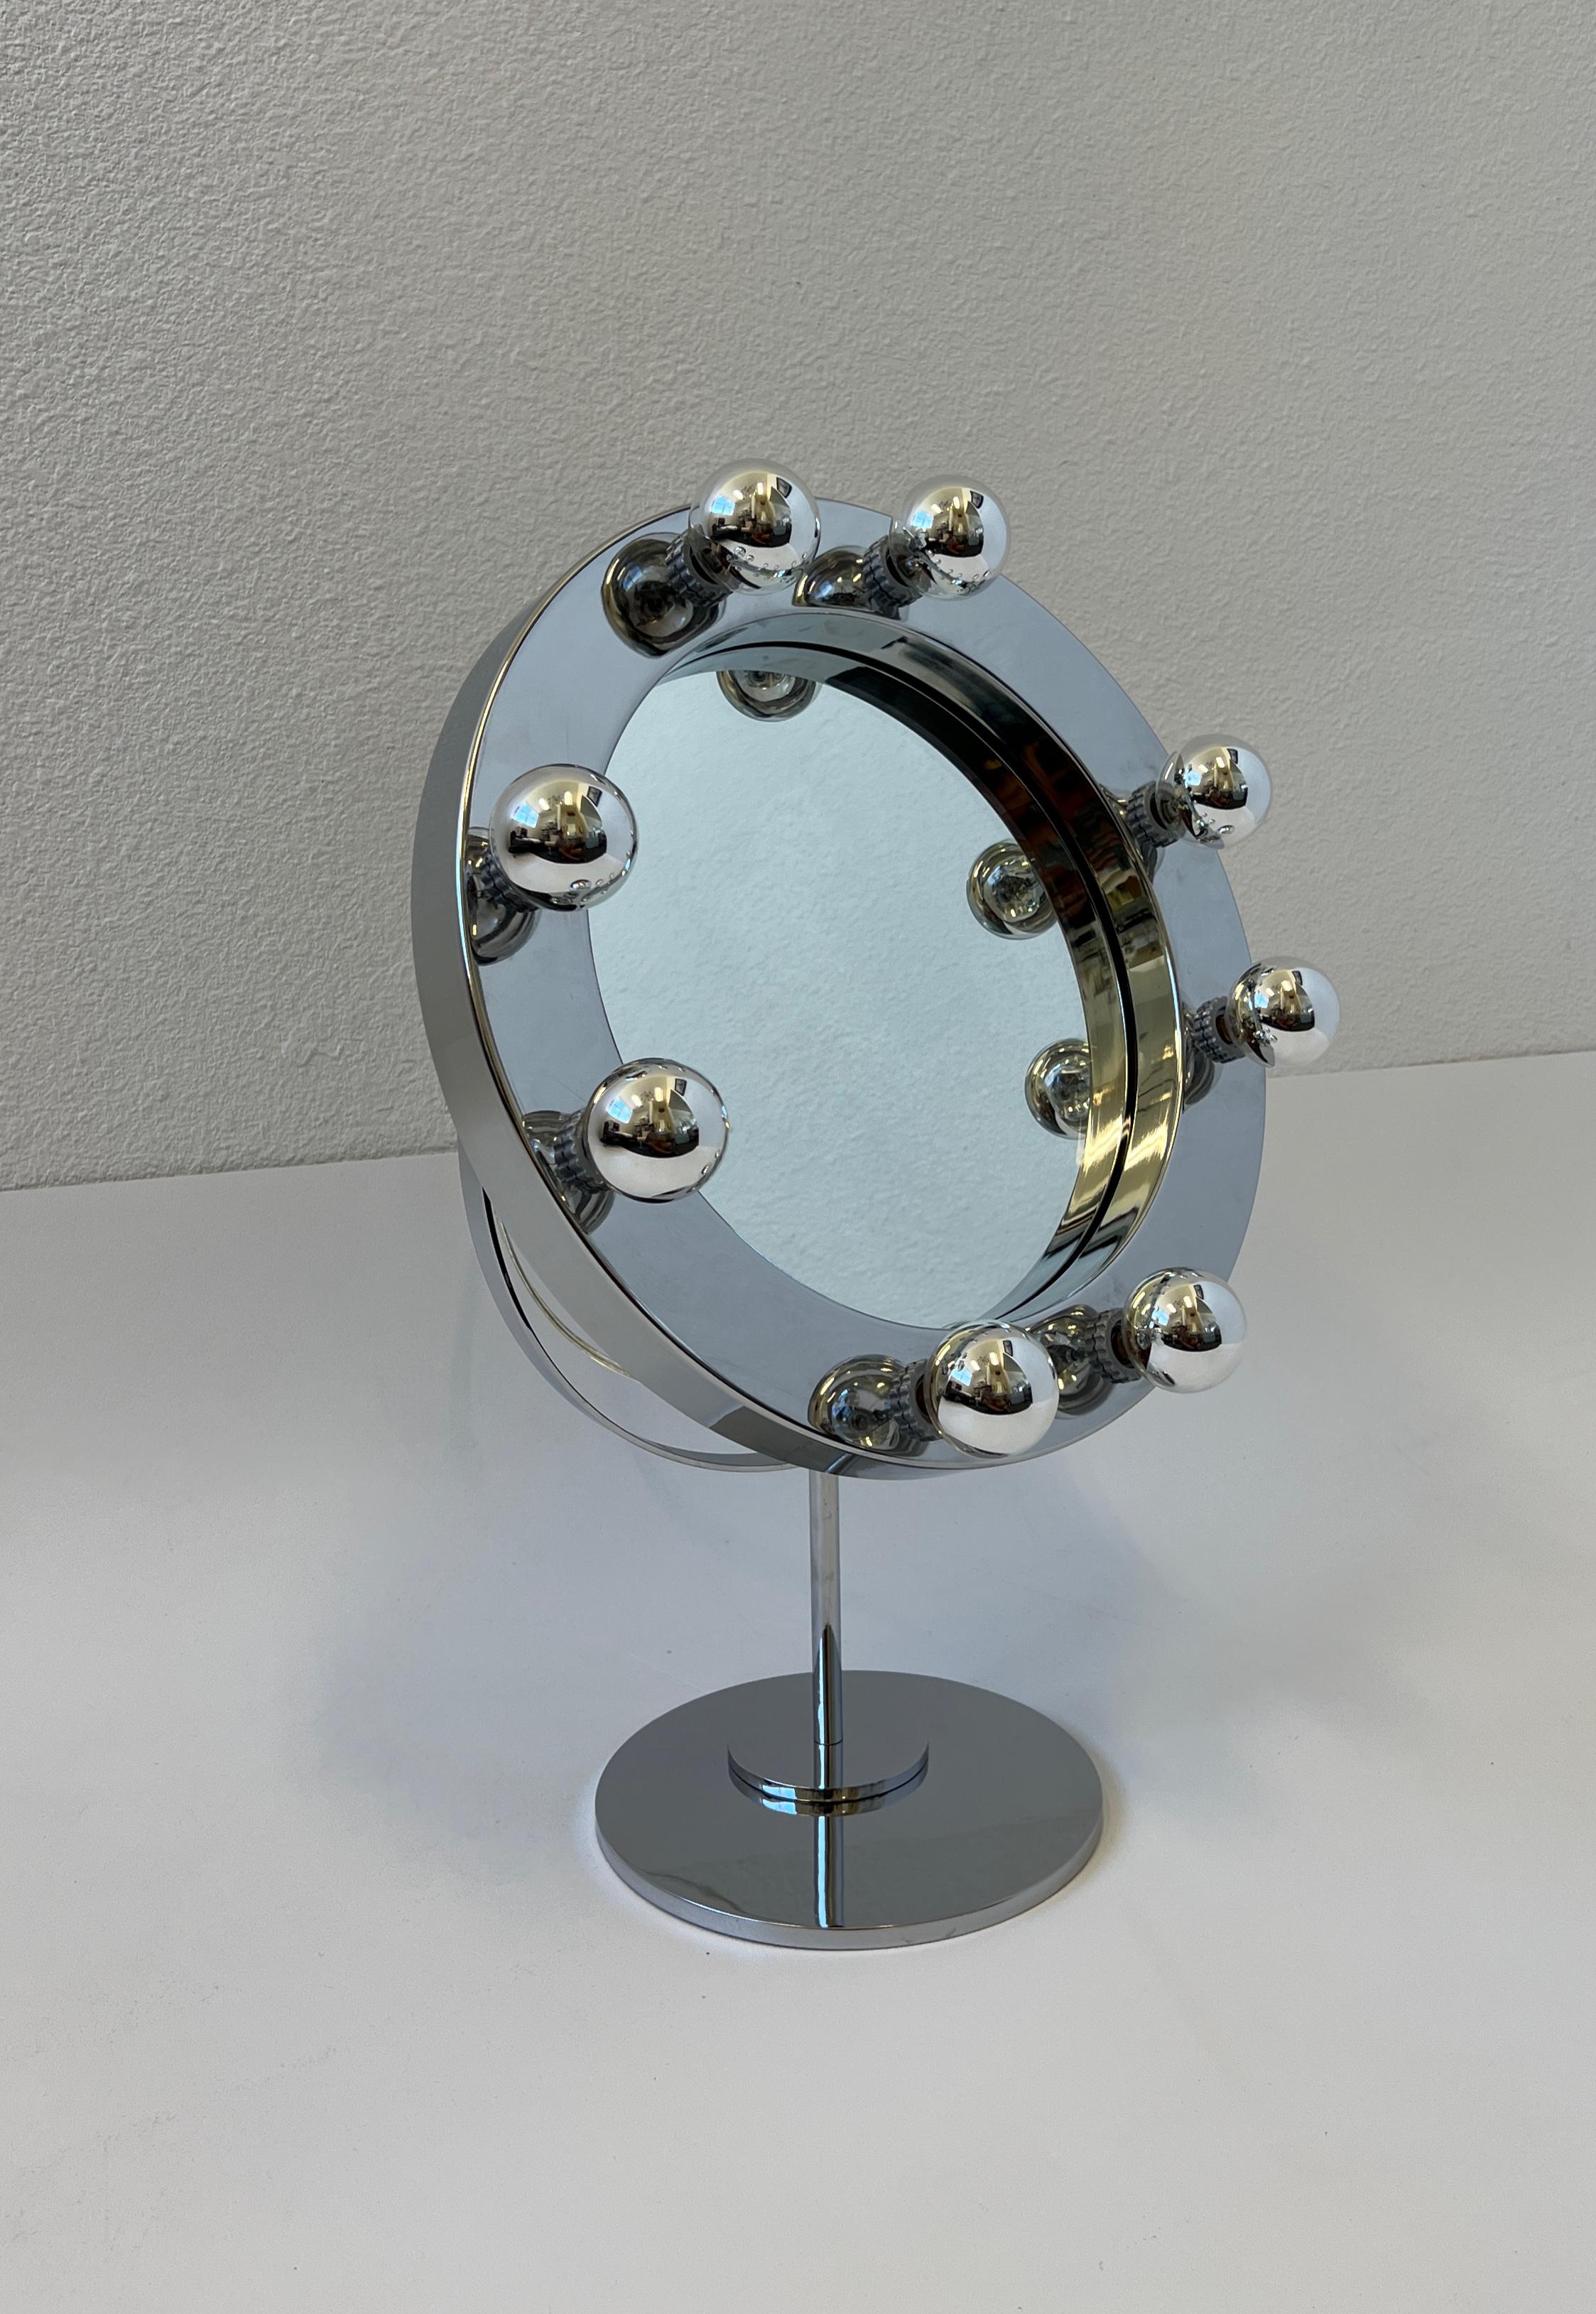 Glamorous O Vanity mirror design by American renowned designer Charles Hollis Jones in the 1960’s. The mirror is adjustable, newly rewired with a built in full range dimmer on the back. It takes eight 25w dipped chrome candelabra lightbulb. 
In